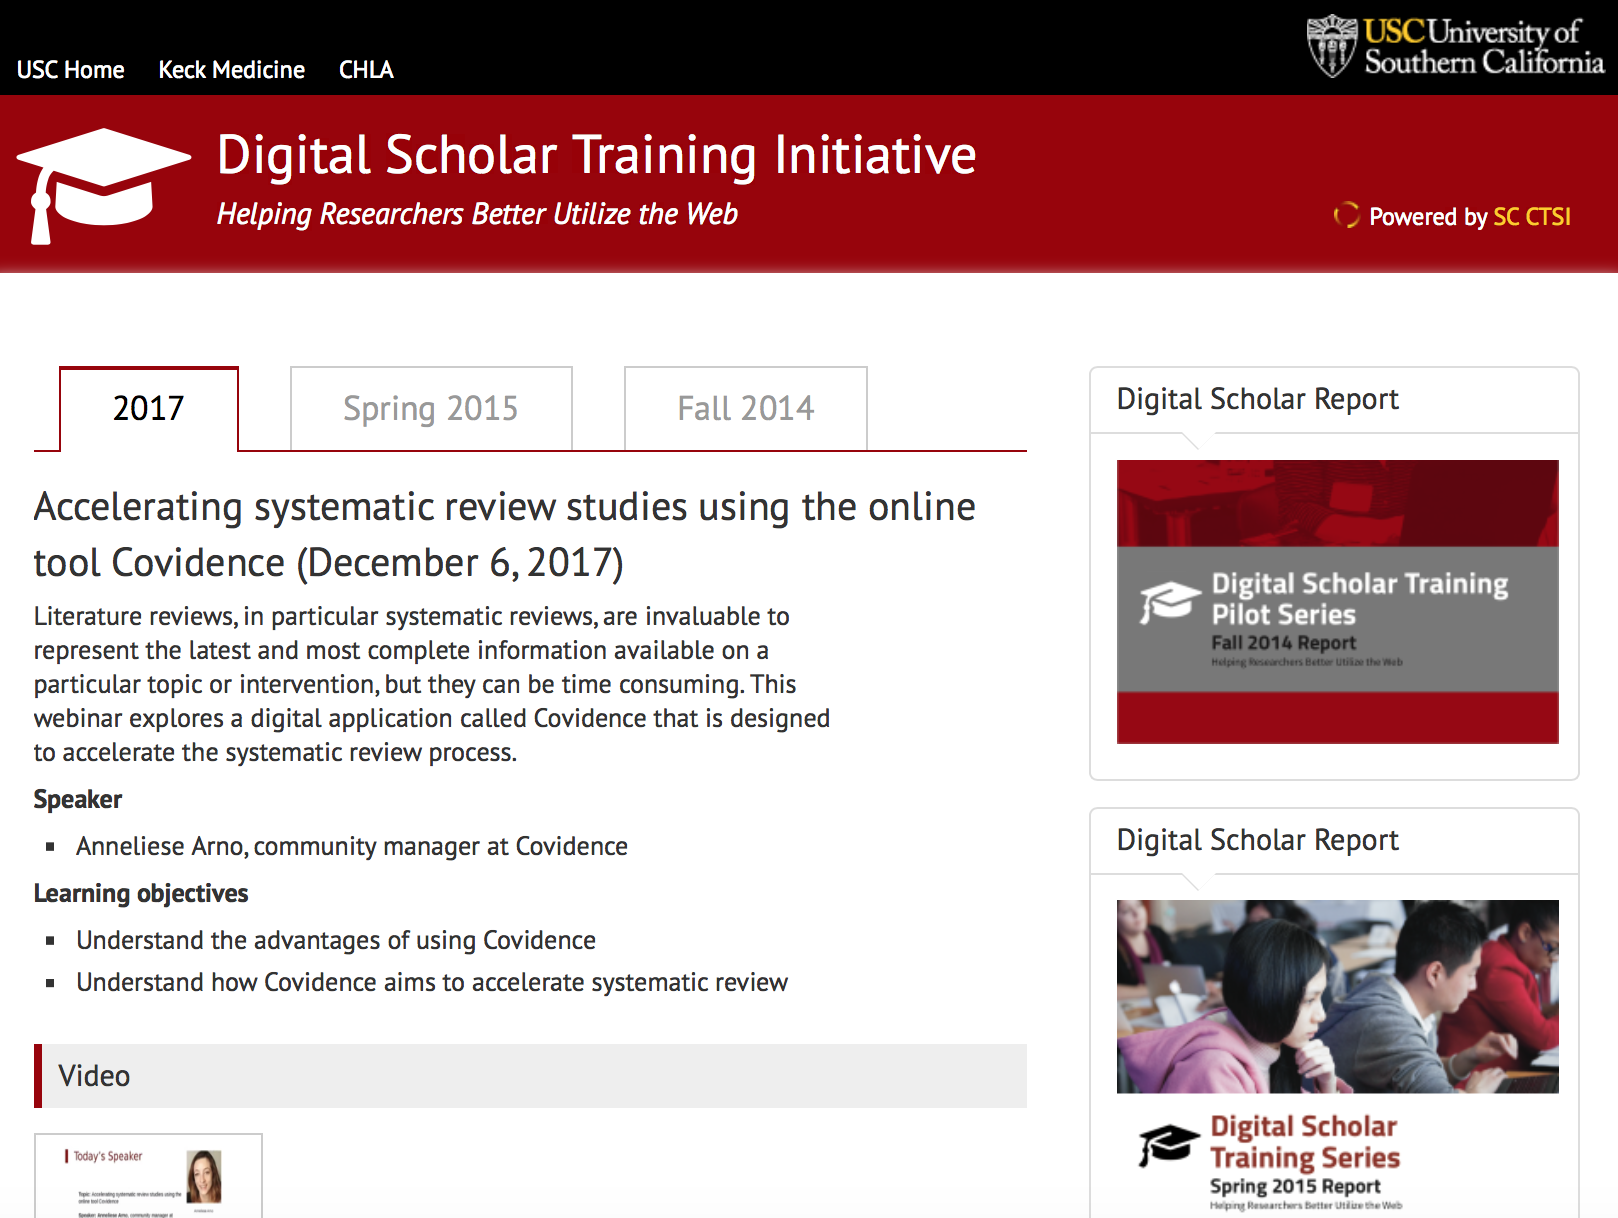 enhancing_clinical_translational_research_through_Training_in_Digital_Practices_and_Approaches.png#asset:3133